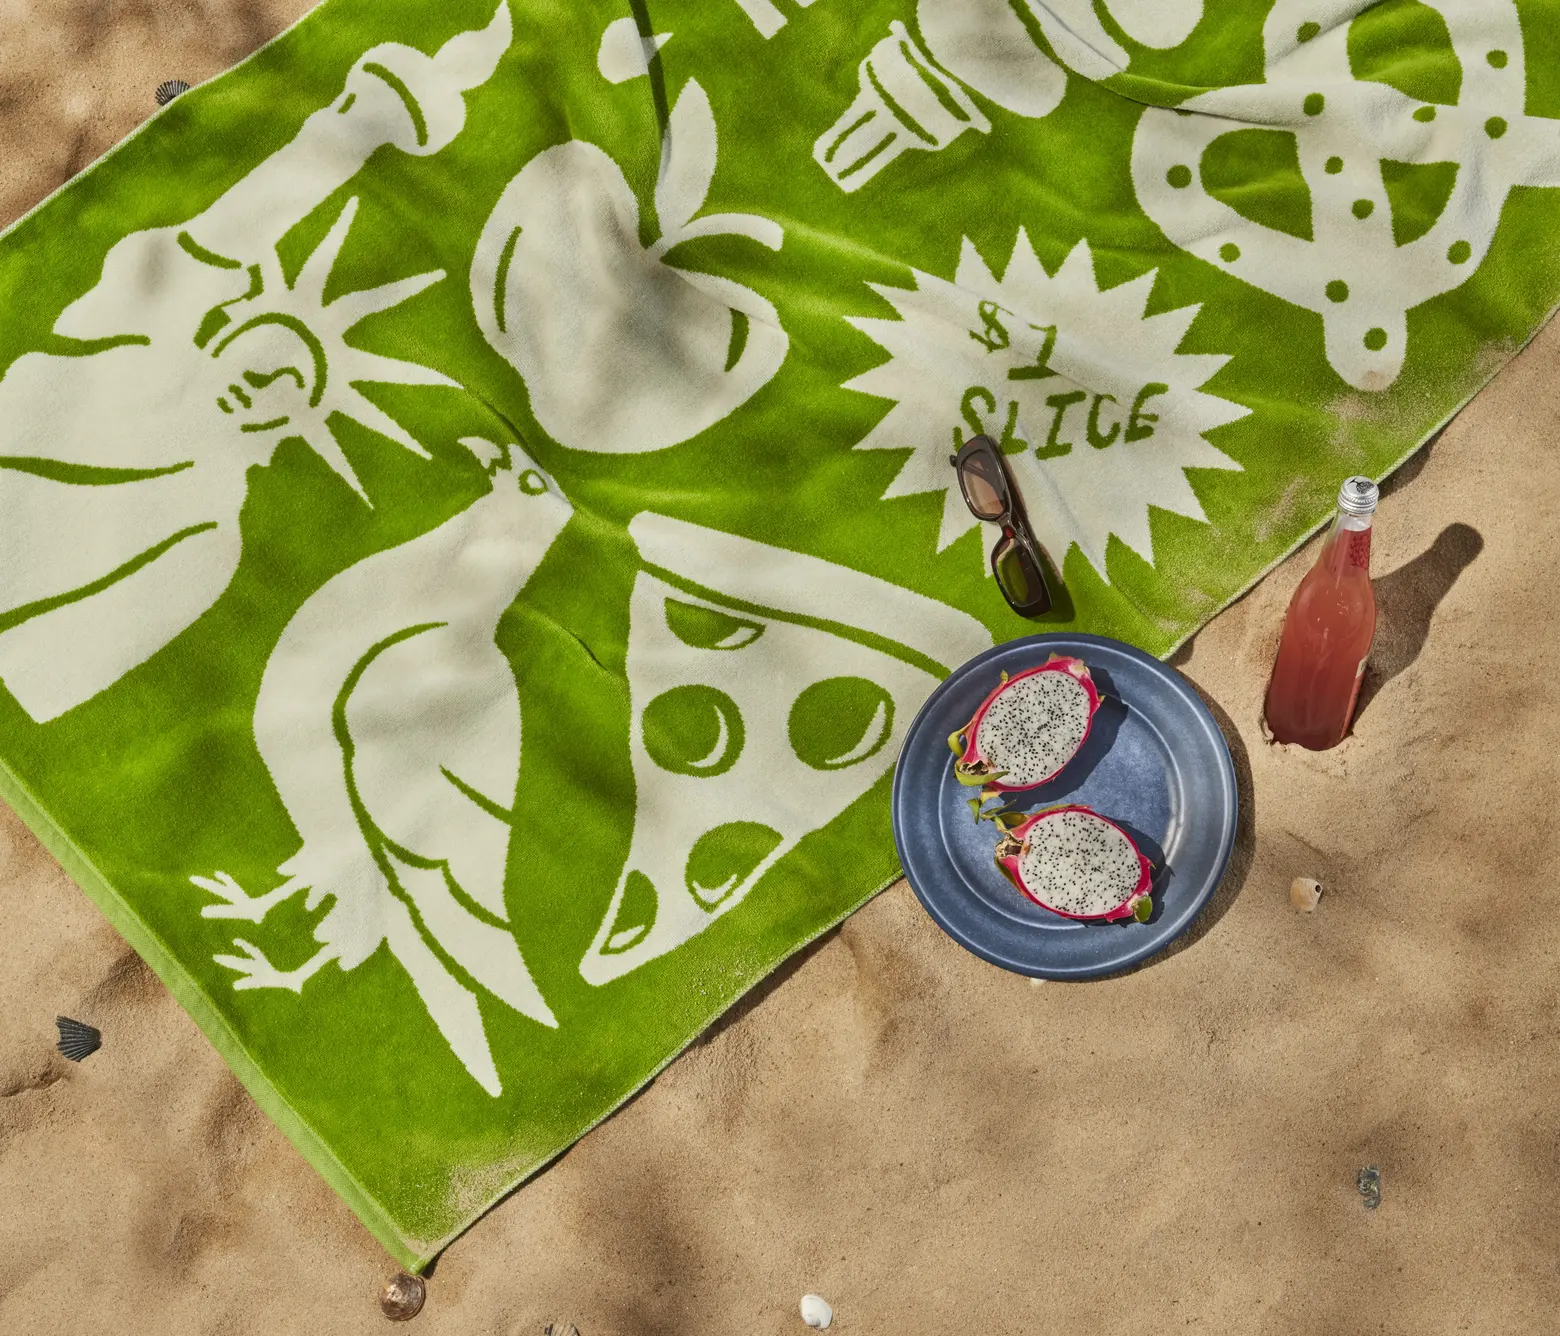 Brooklinen’s new towel collection brings NYC icons to the beach